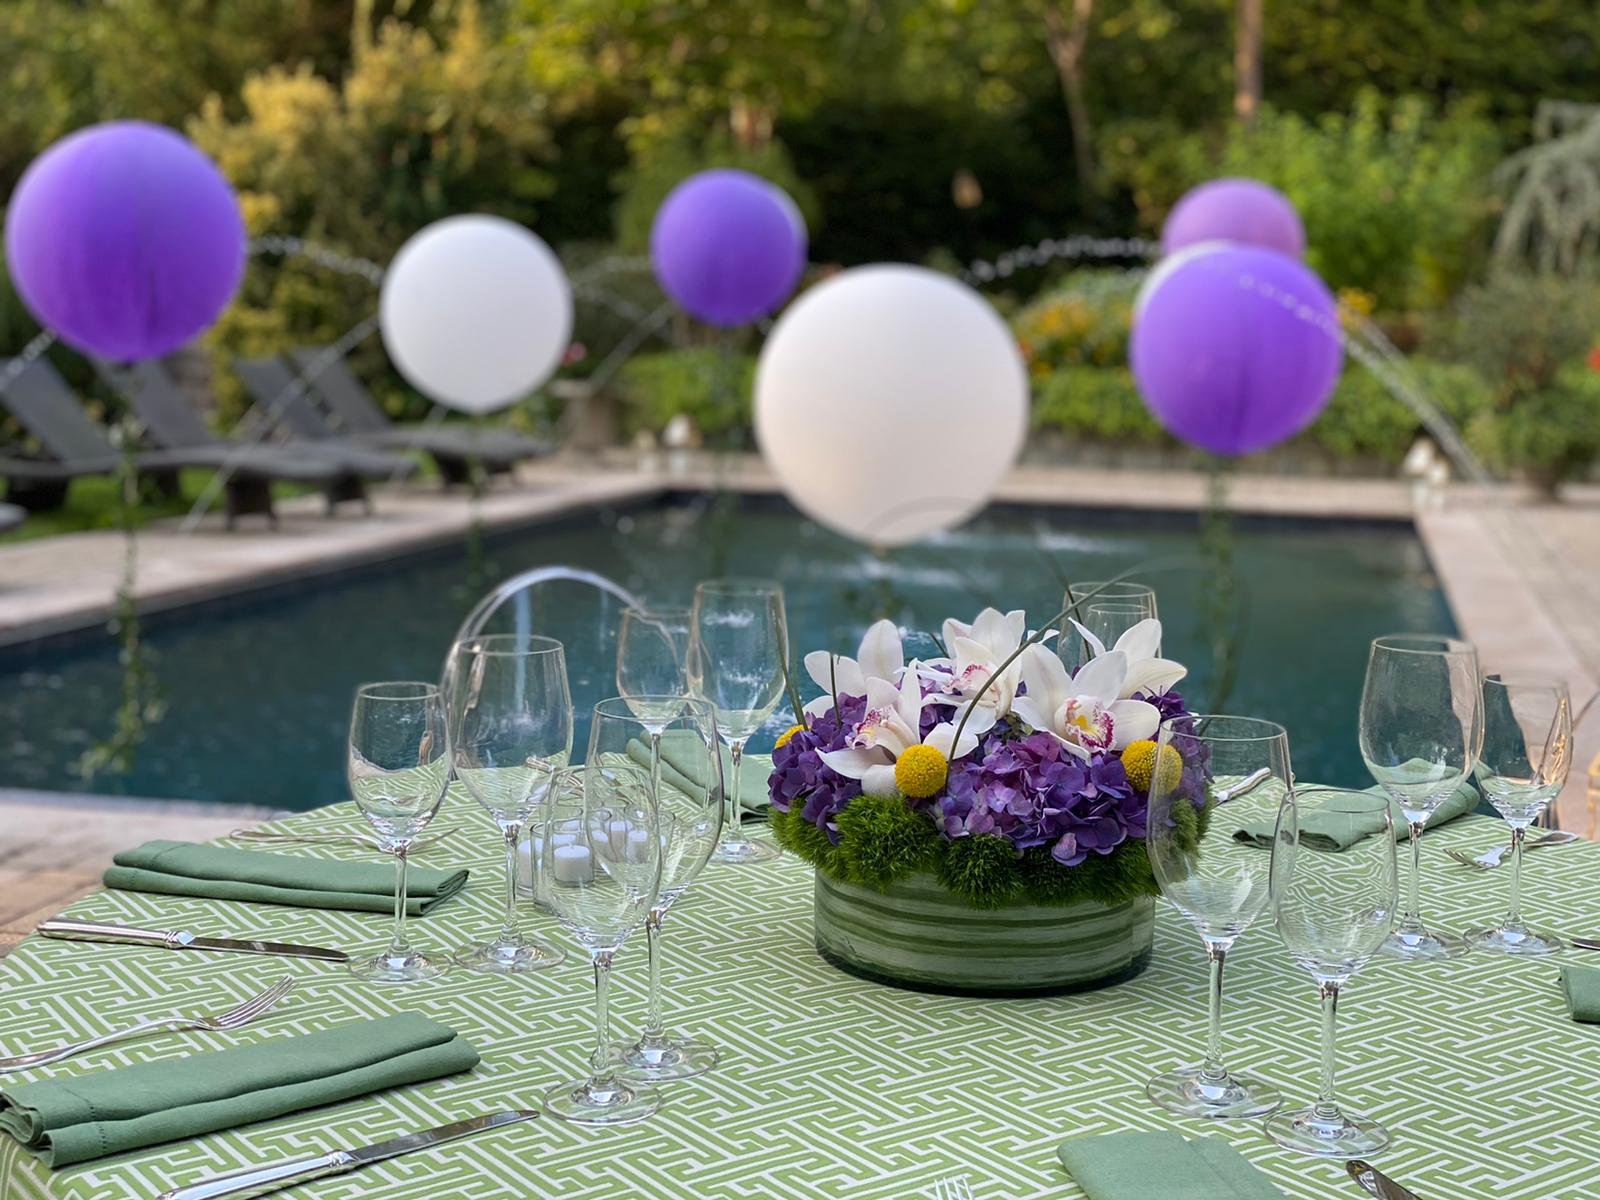 Our parties are GORGEOUS if you ask us 🤩 Want to find out more? Check out our website- link in bio! ✨
.
.
#marylandevents #decor #eventdecor #eventdecormayrland